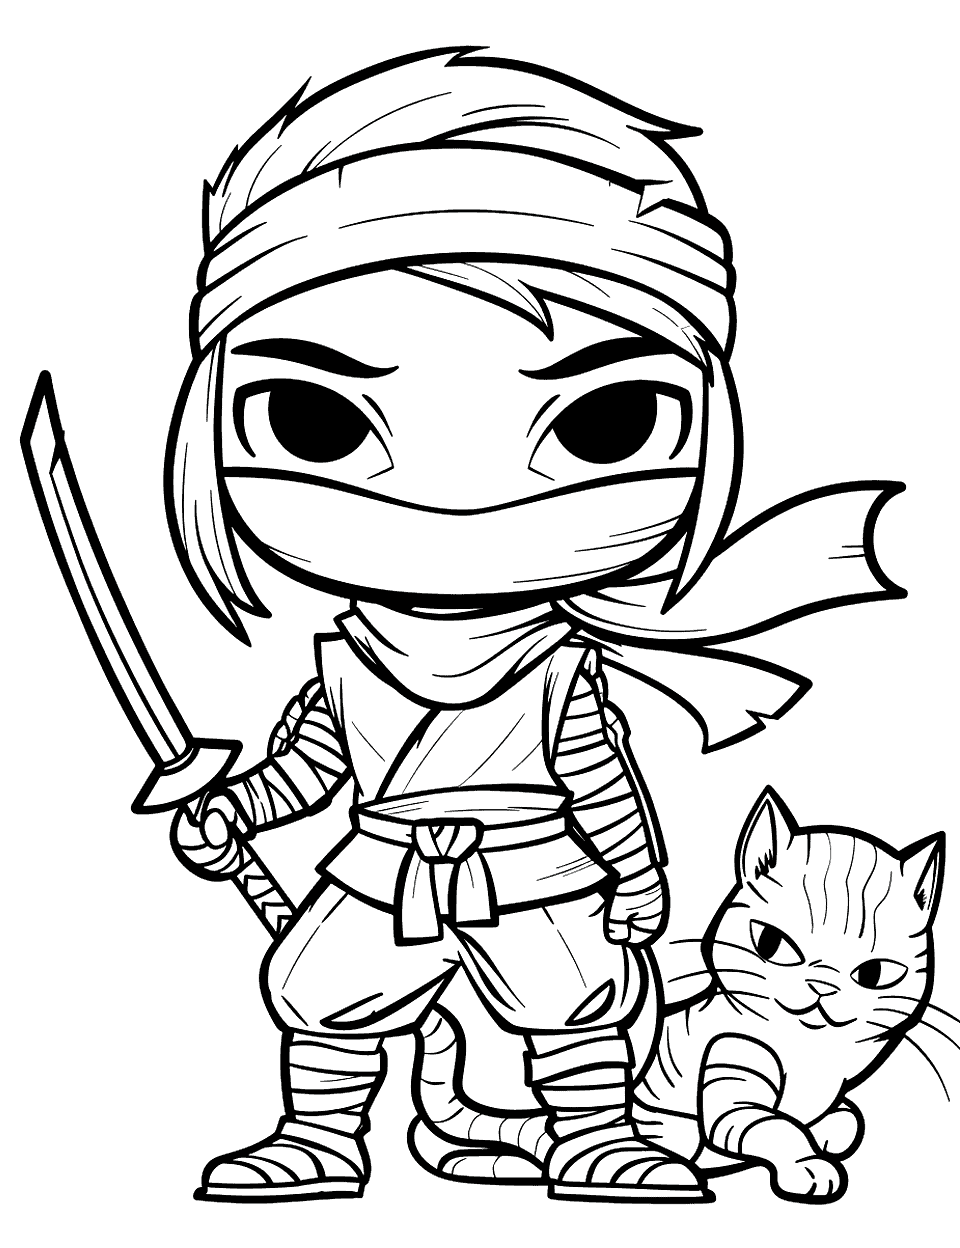 Girl Ninja and Her Pet Cat Coloring Page - A girl ninja with her loyal pet cat.